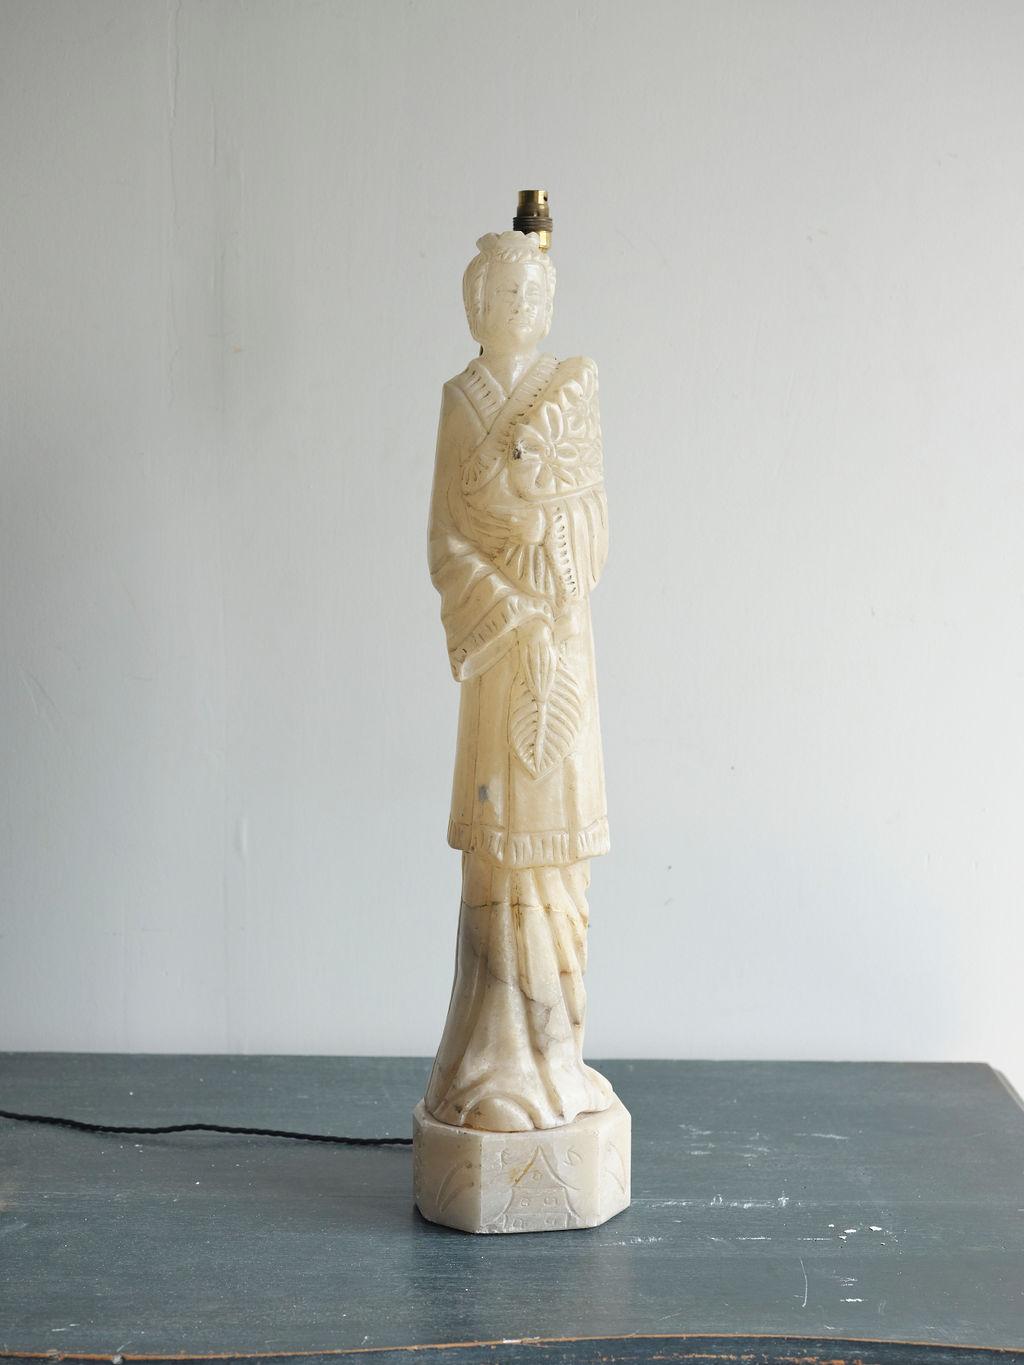 This is a lovely figurative alabaster lamp, created in 1860. The lamp figure appears to be a woman in a decorative cloak, holding a leaf. The color is a creamy off-white color. This lamp is sturdy. It is European wired.